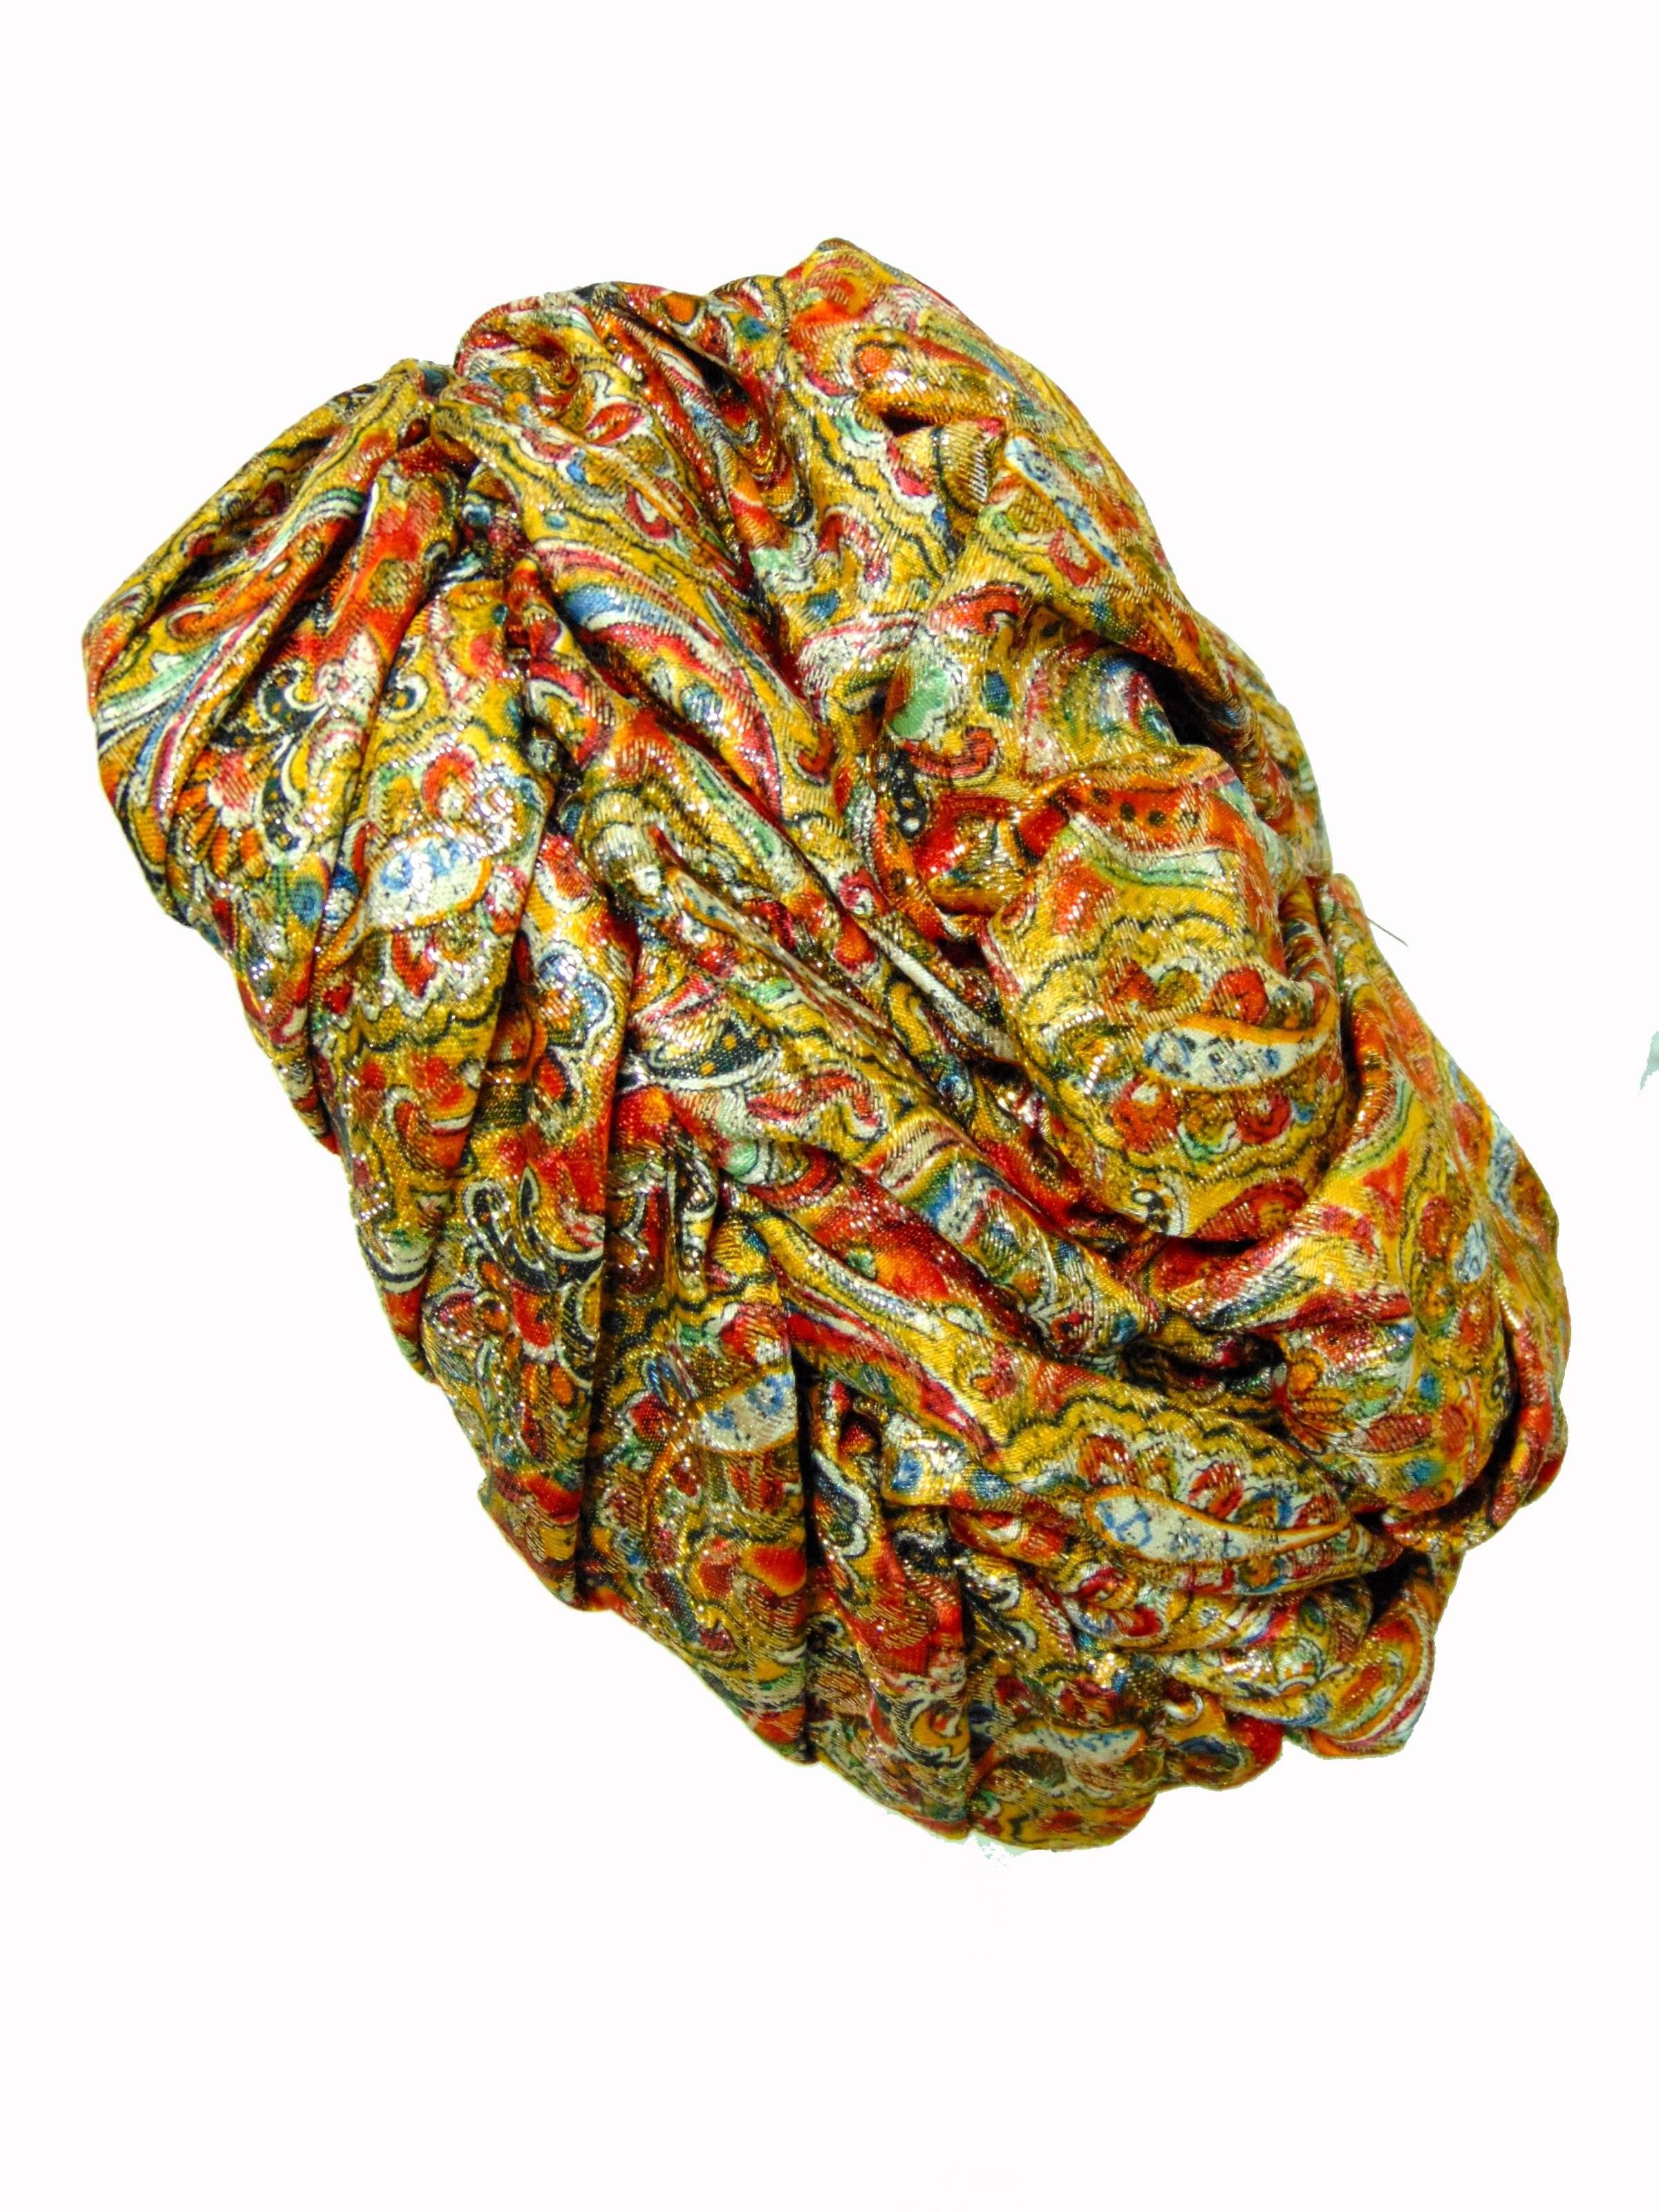 Women's 1950s Colorful Metallic Paisley Turban Hat by Marshall Field & Company Size S 